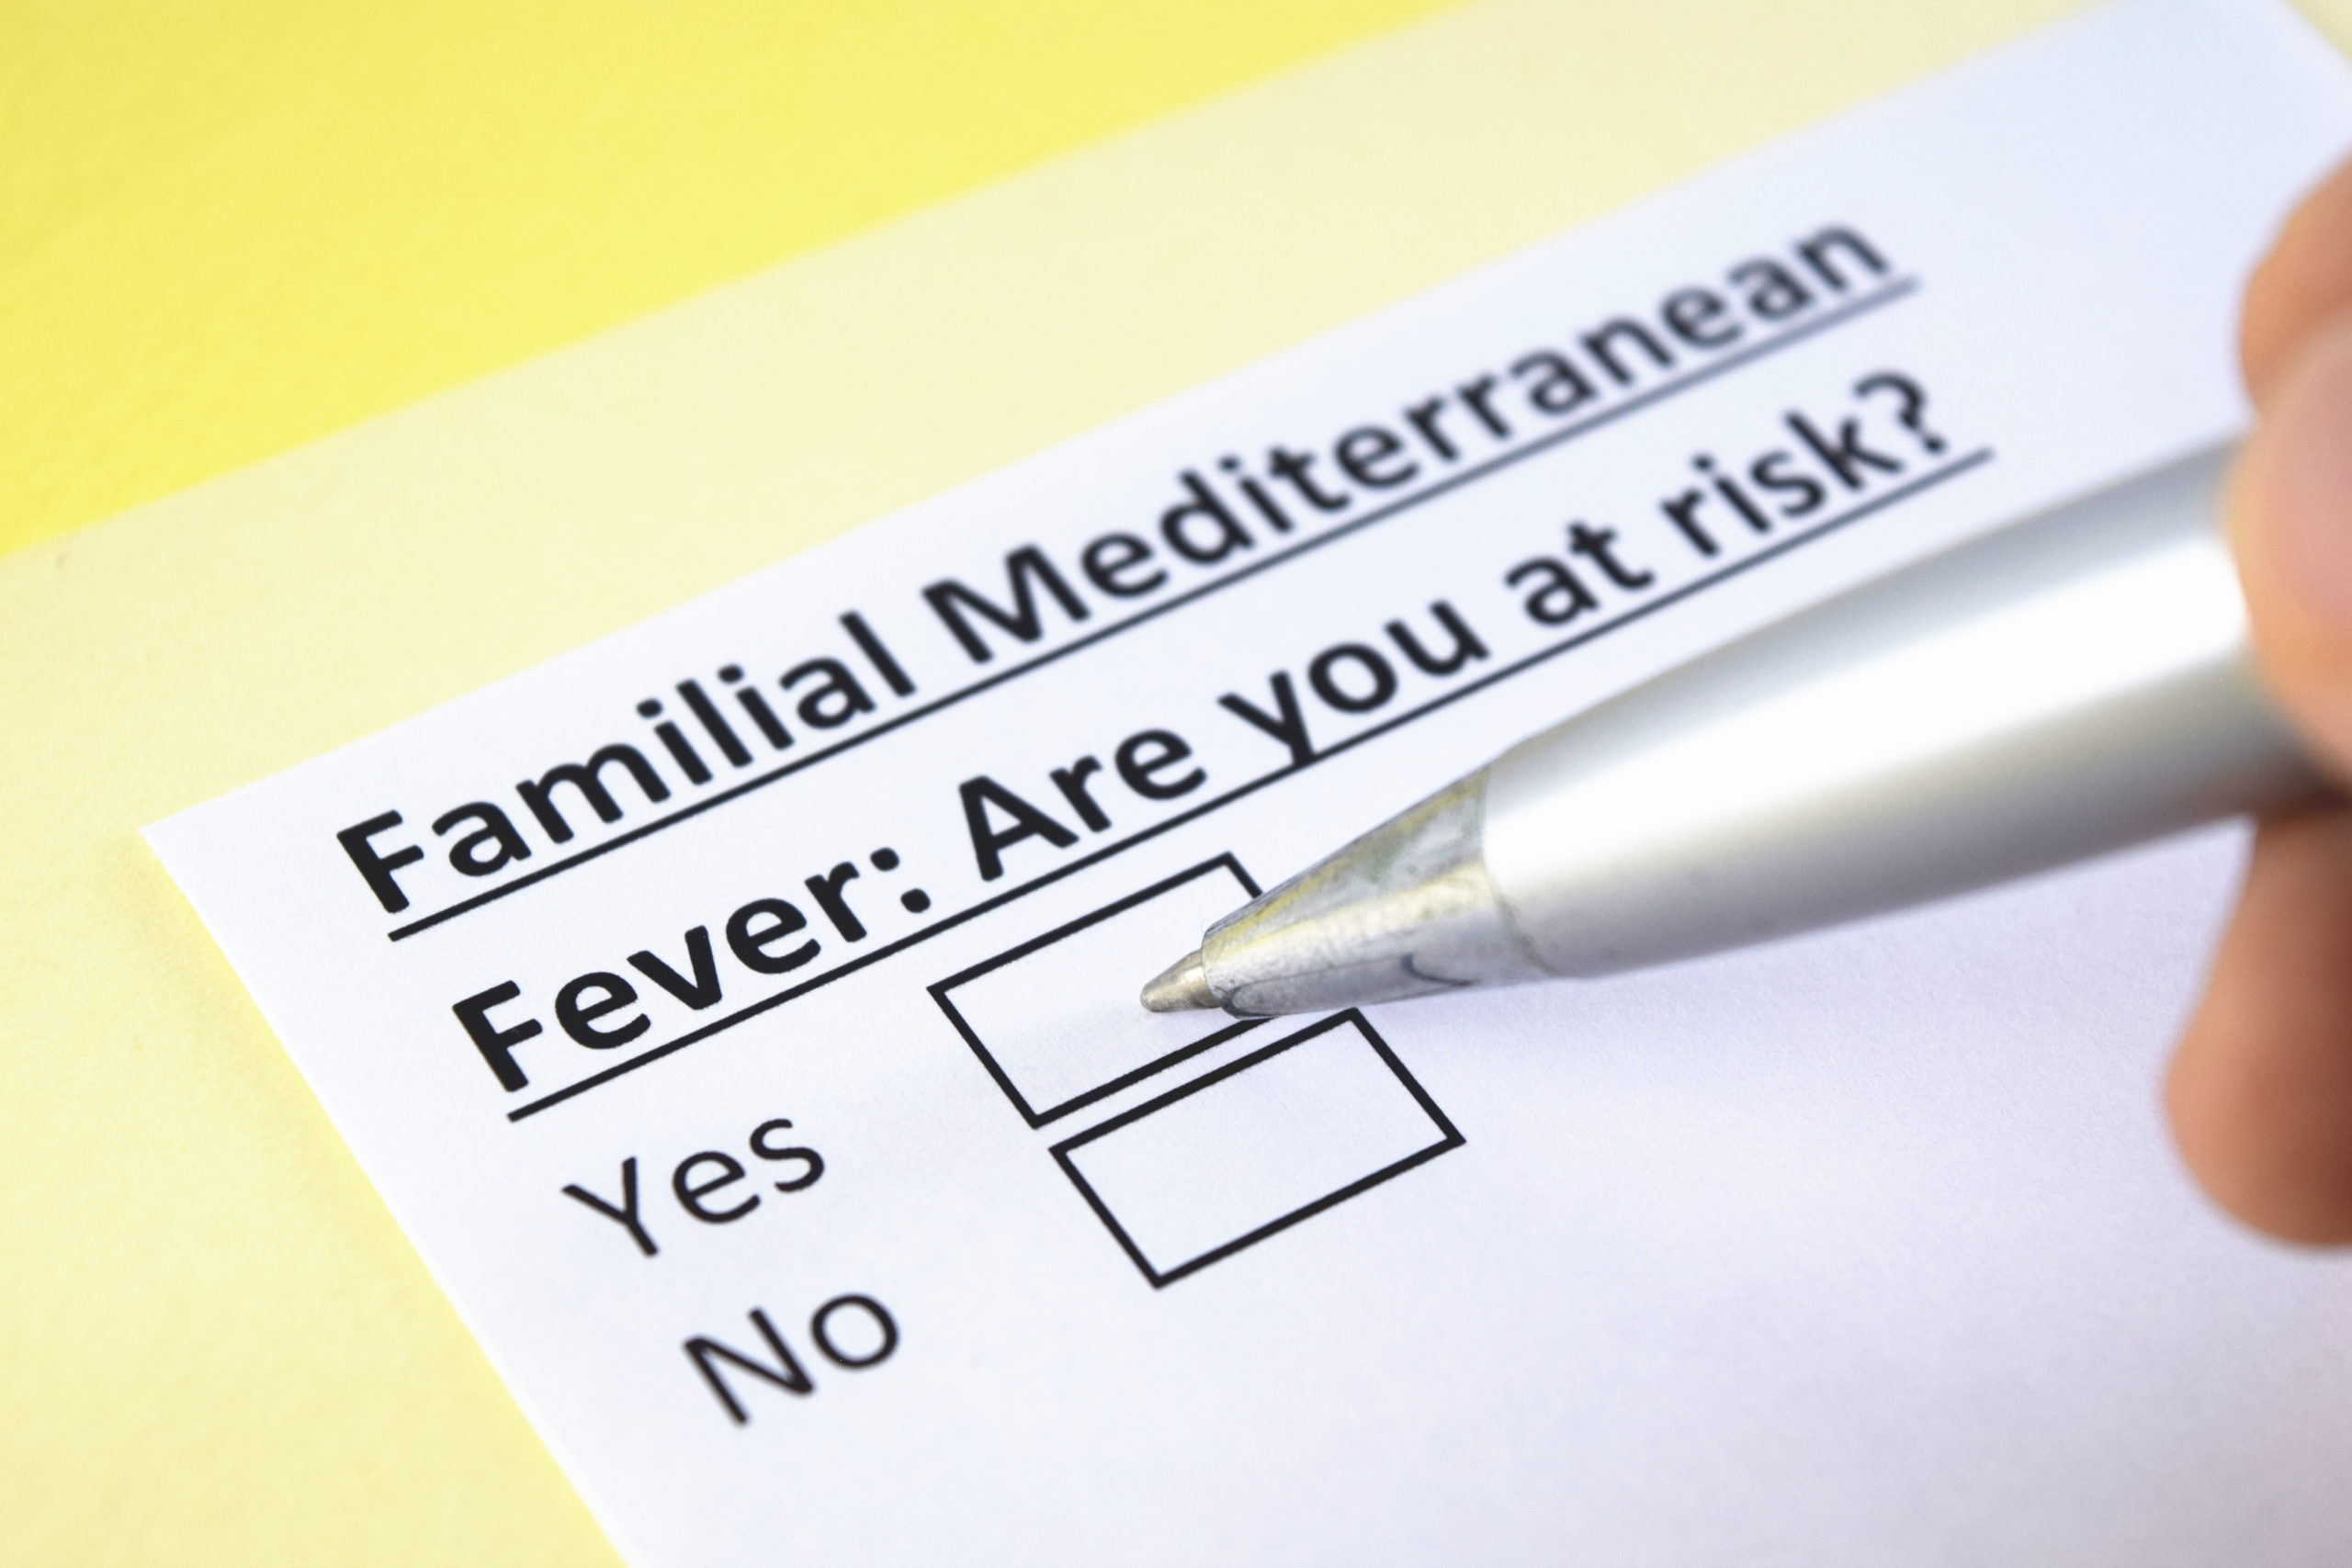 Image of a survey asking whether someone believes they are at risk for Familial Mediterranean Fever or not